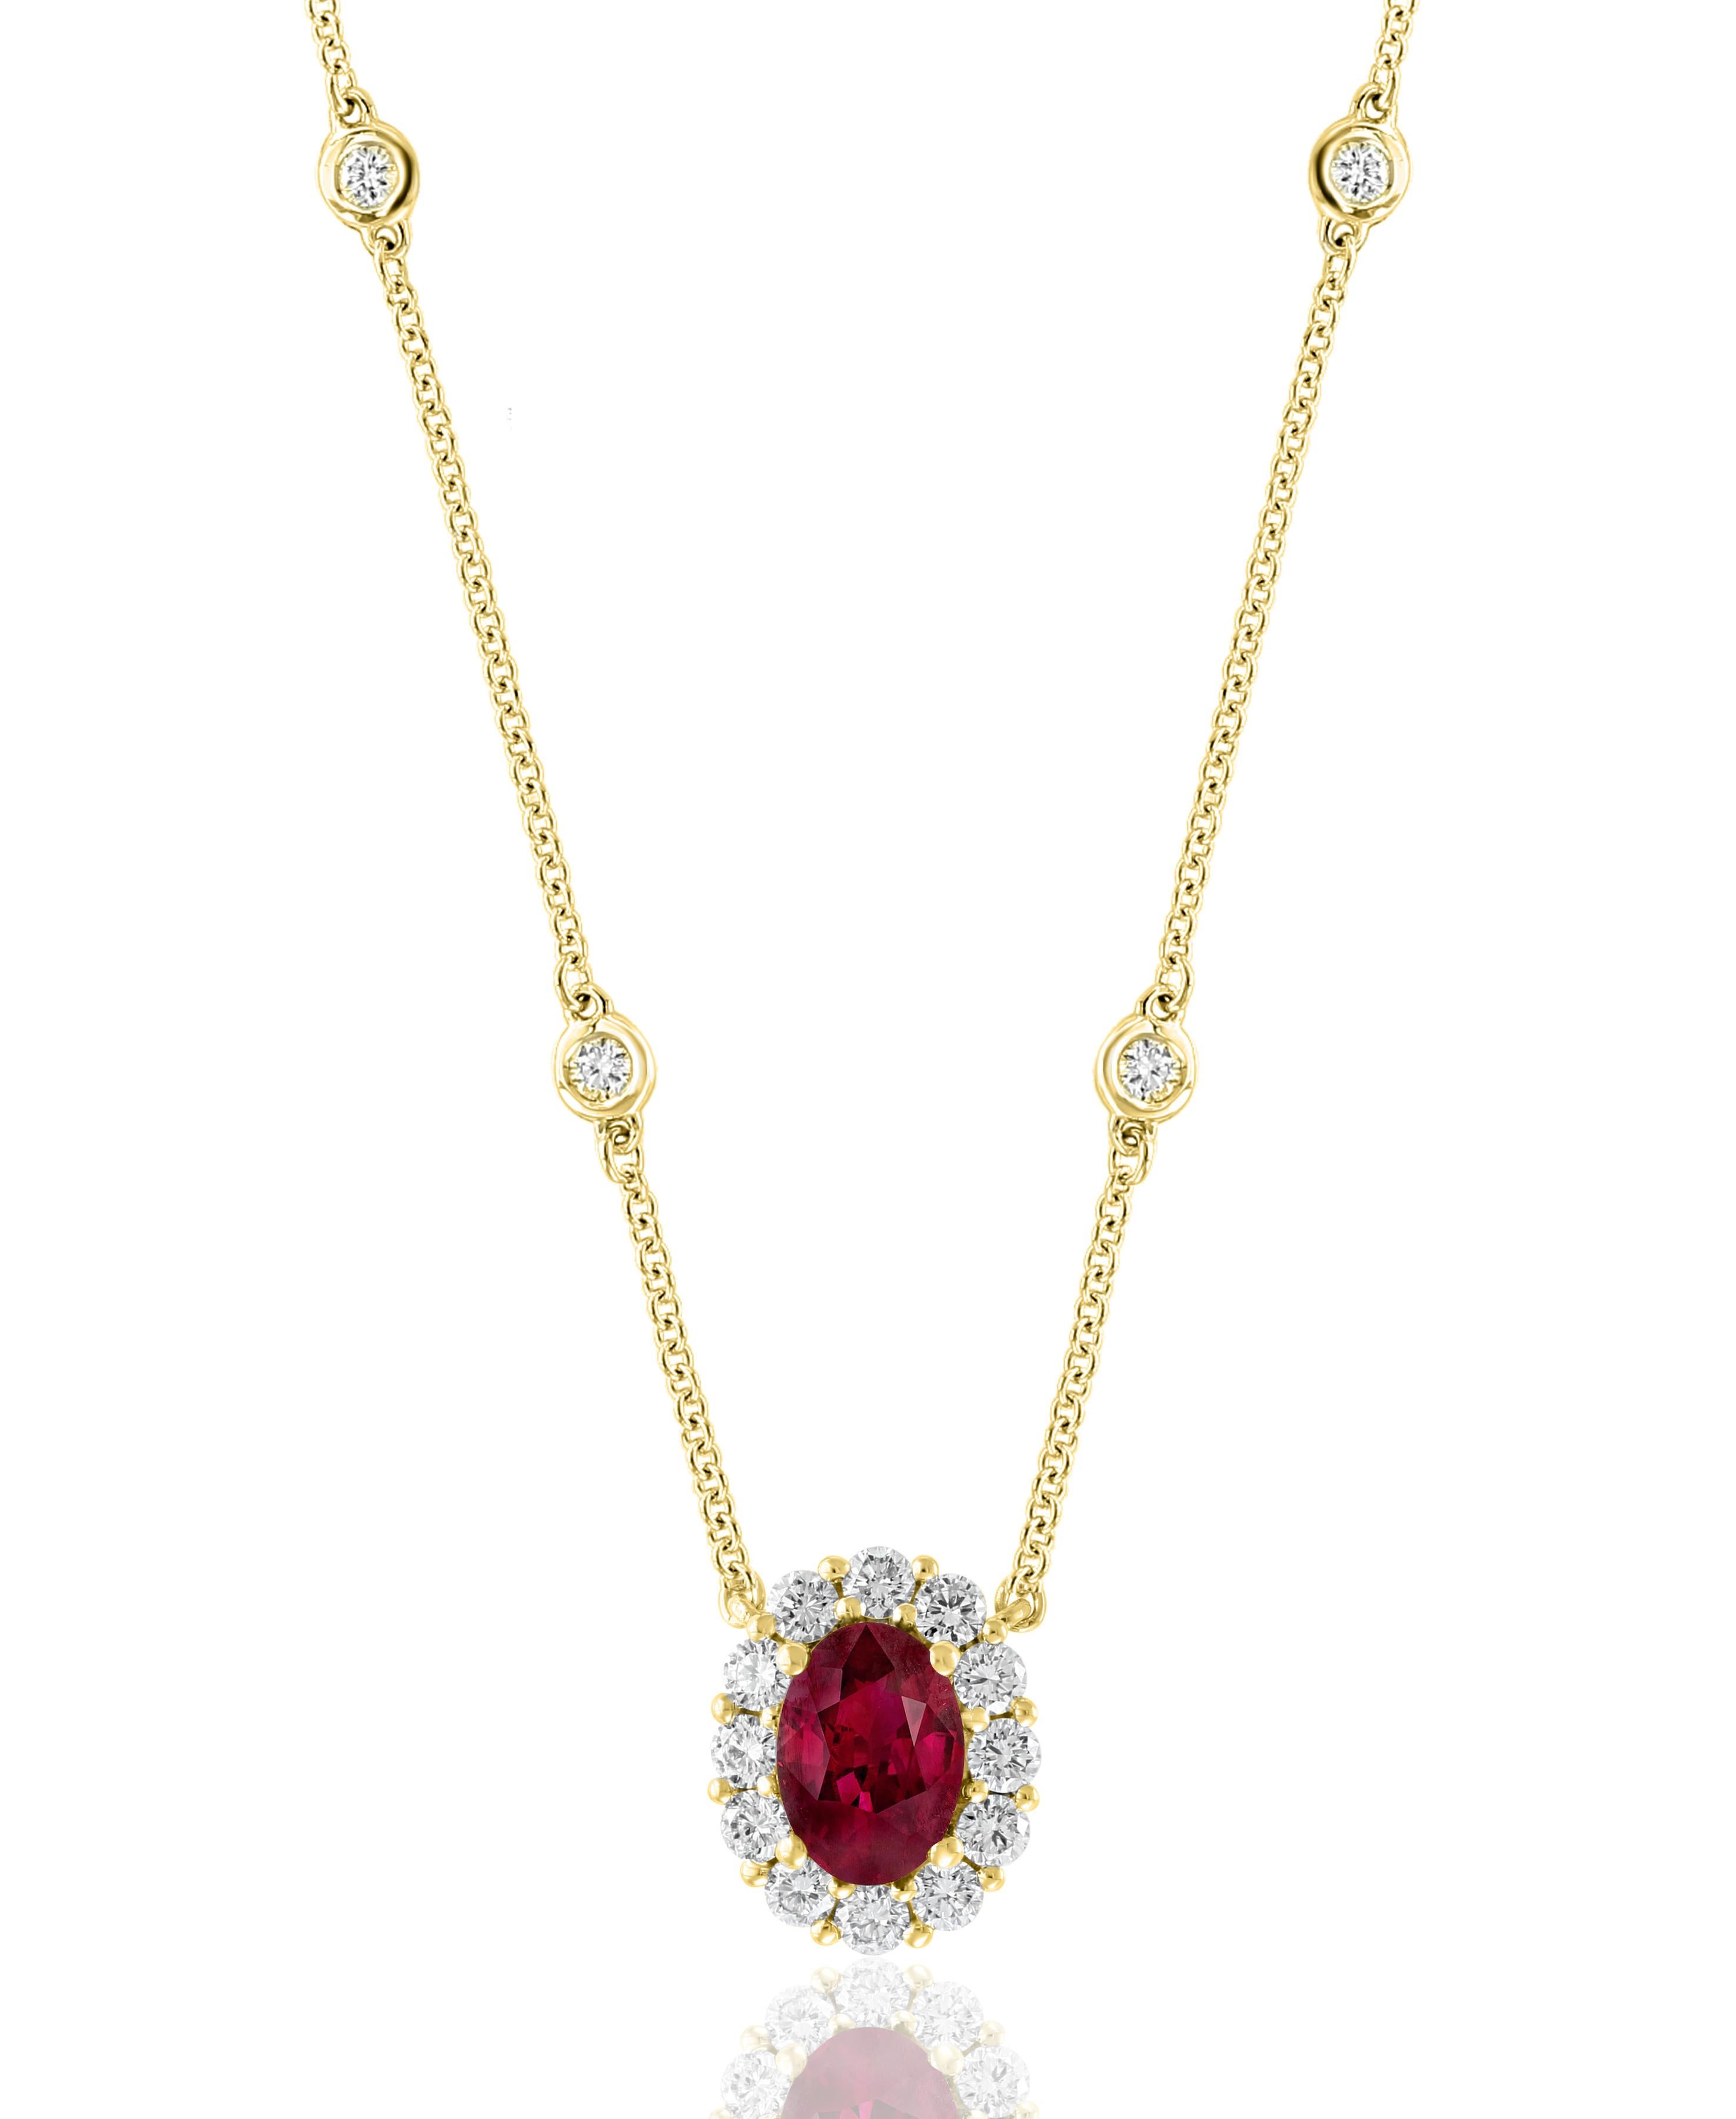 0.71 Carat Oval Cut Ruby and Diamond Pendant Necklace in 14K Yellow Gold In New Condition For Sale In NEW YORK, NY